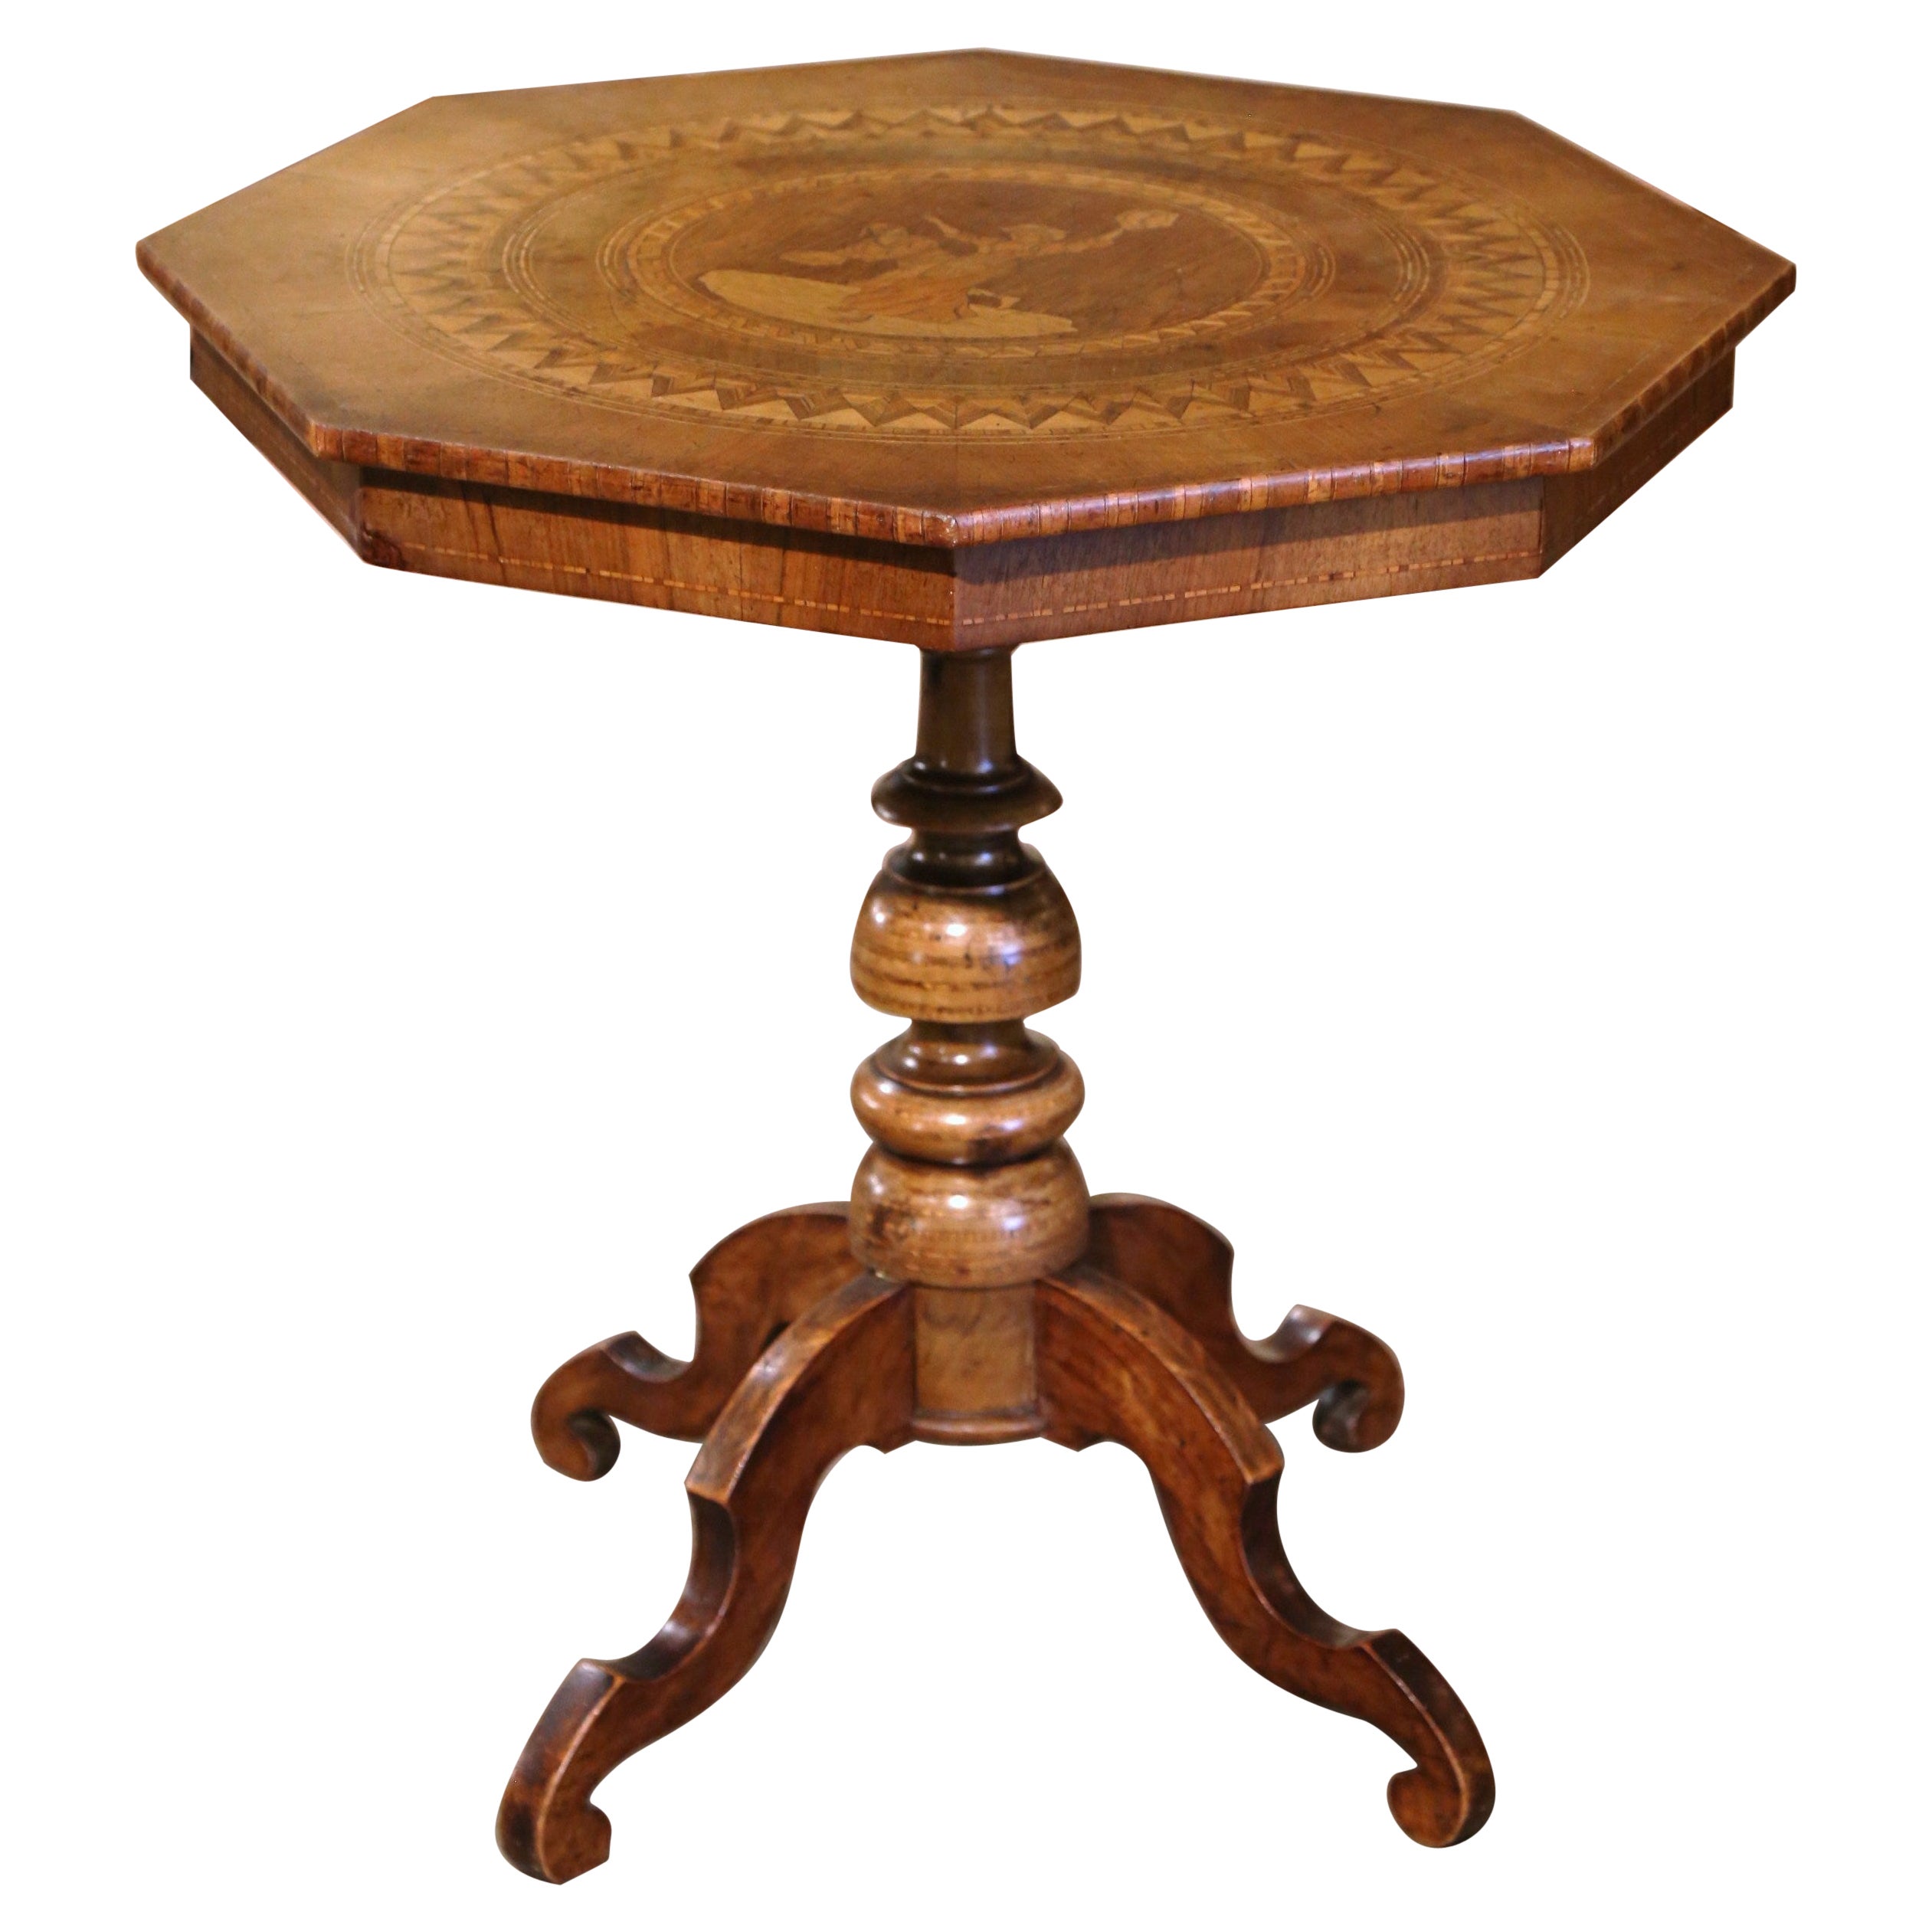 19th Century French Octagonal Carved Walnut Inlaid Pedestal Gueridon Table For Sale